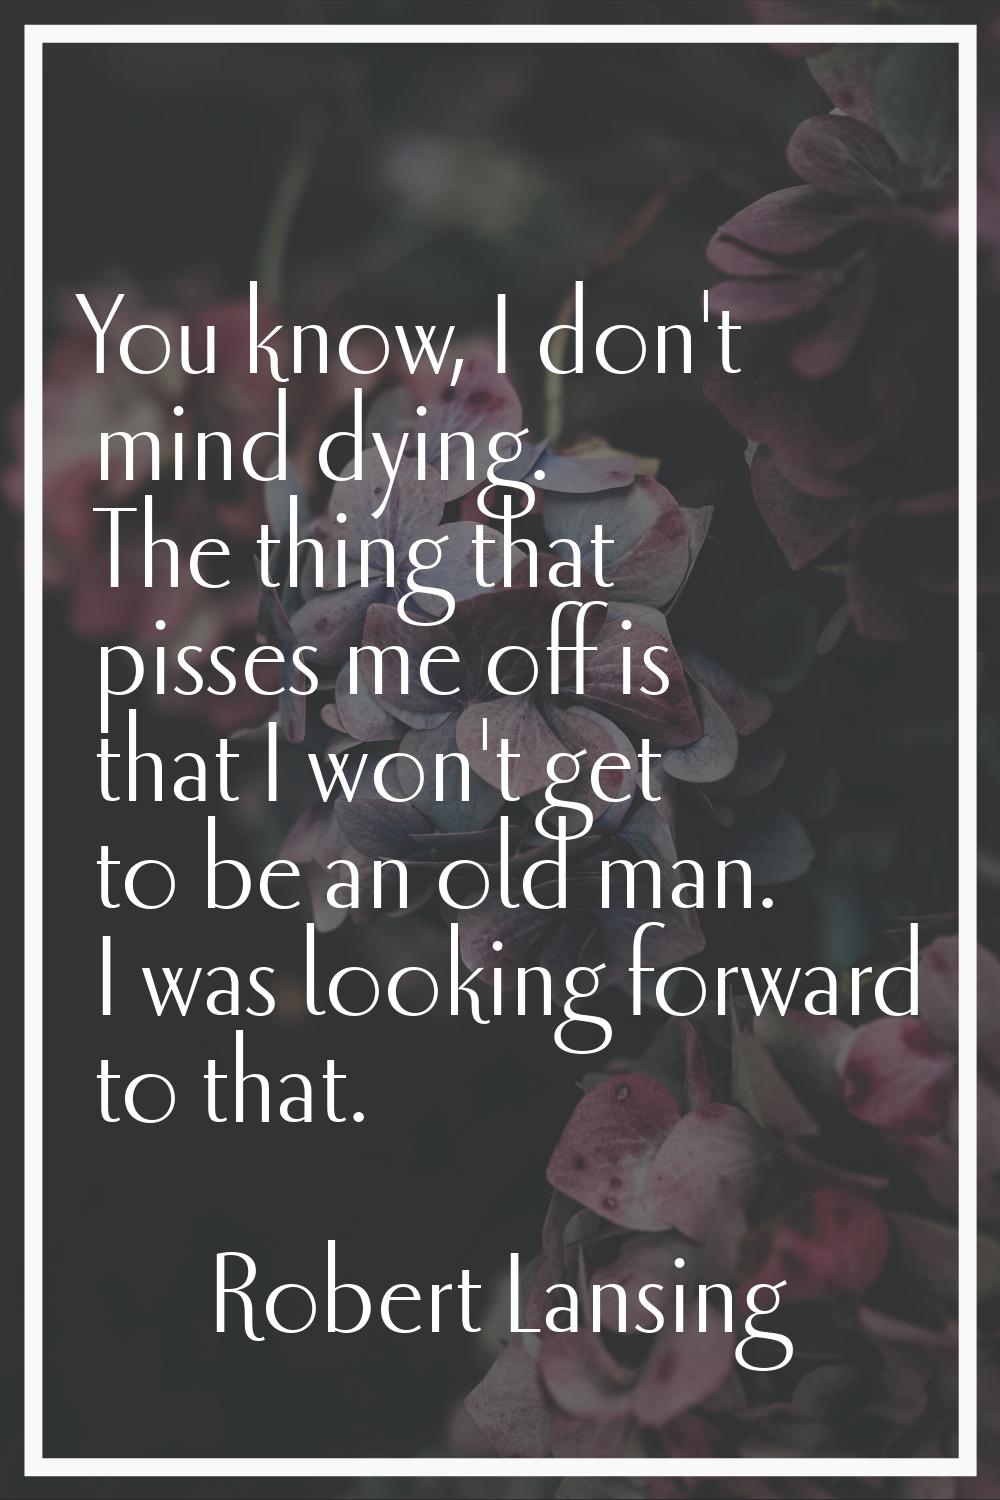 You know, I don't mind dying. The thing that pisses me off is that I won't get to be an old man. I 